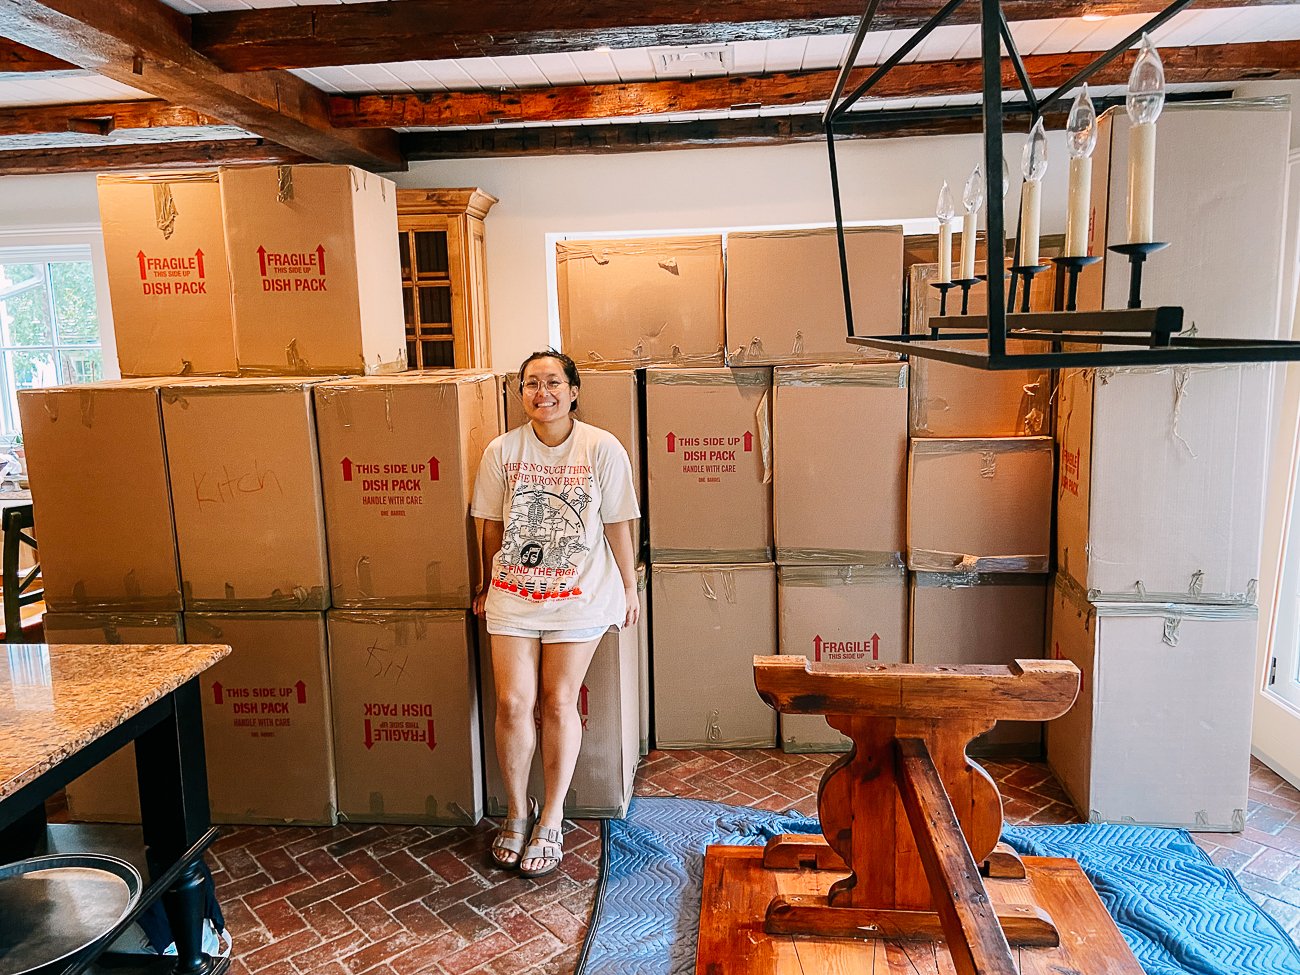 Kaitlin in front of wall of boxes in kitchen